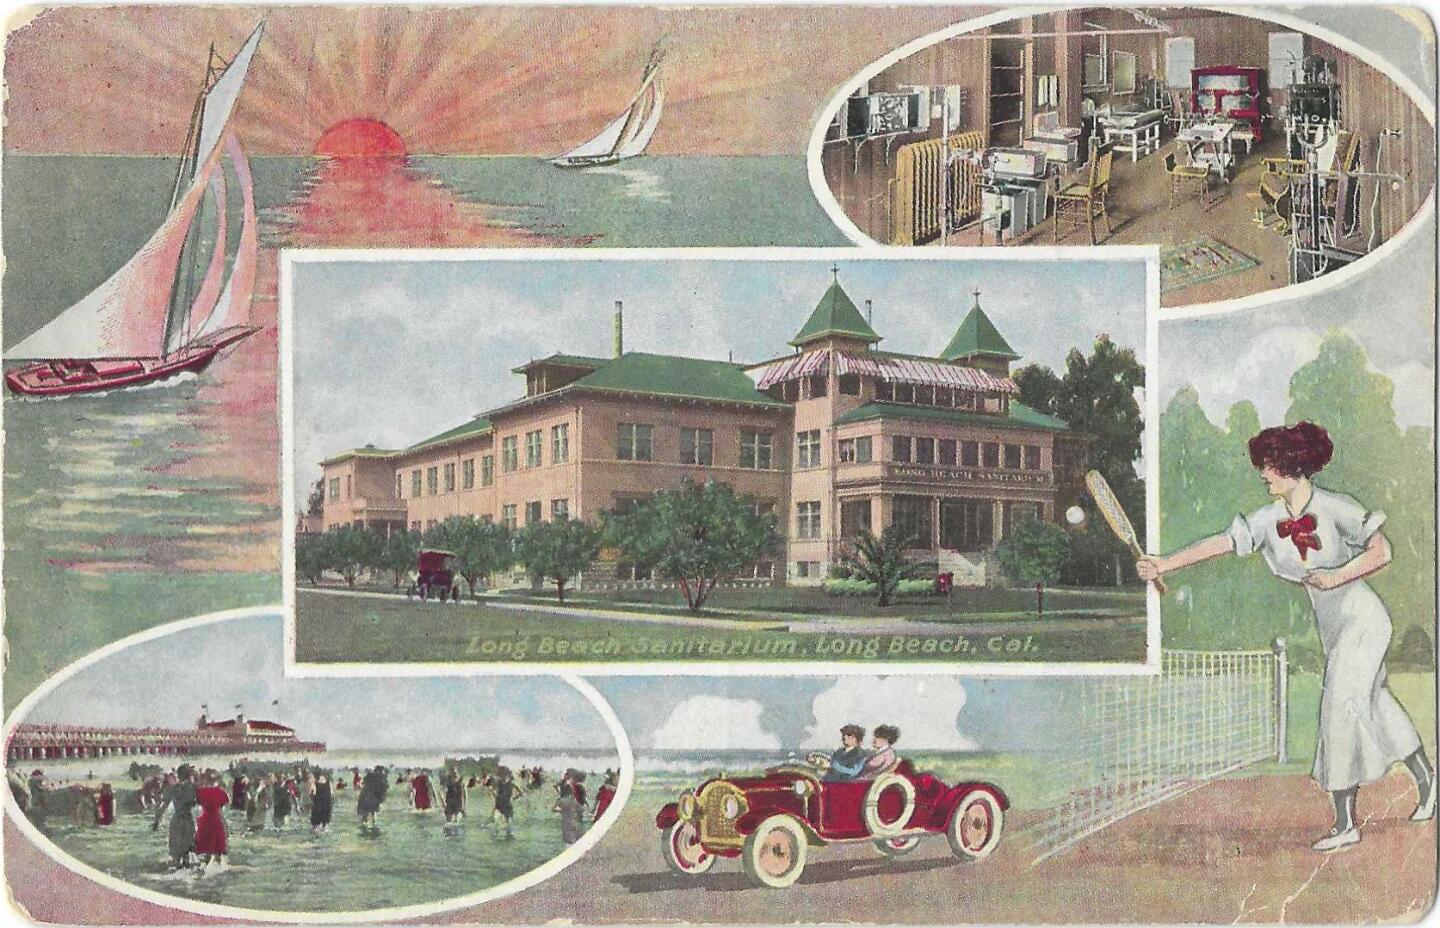 Sailboats, tennis, driving on the beach and a patient room shown on a vintage postcard